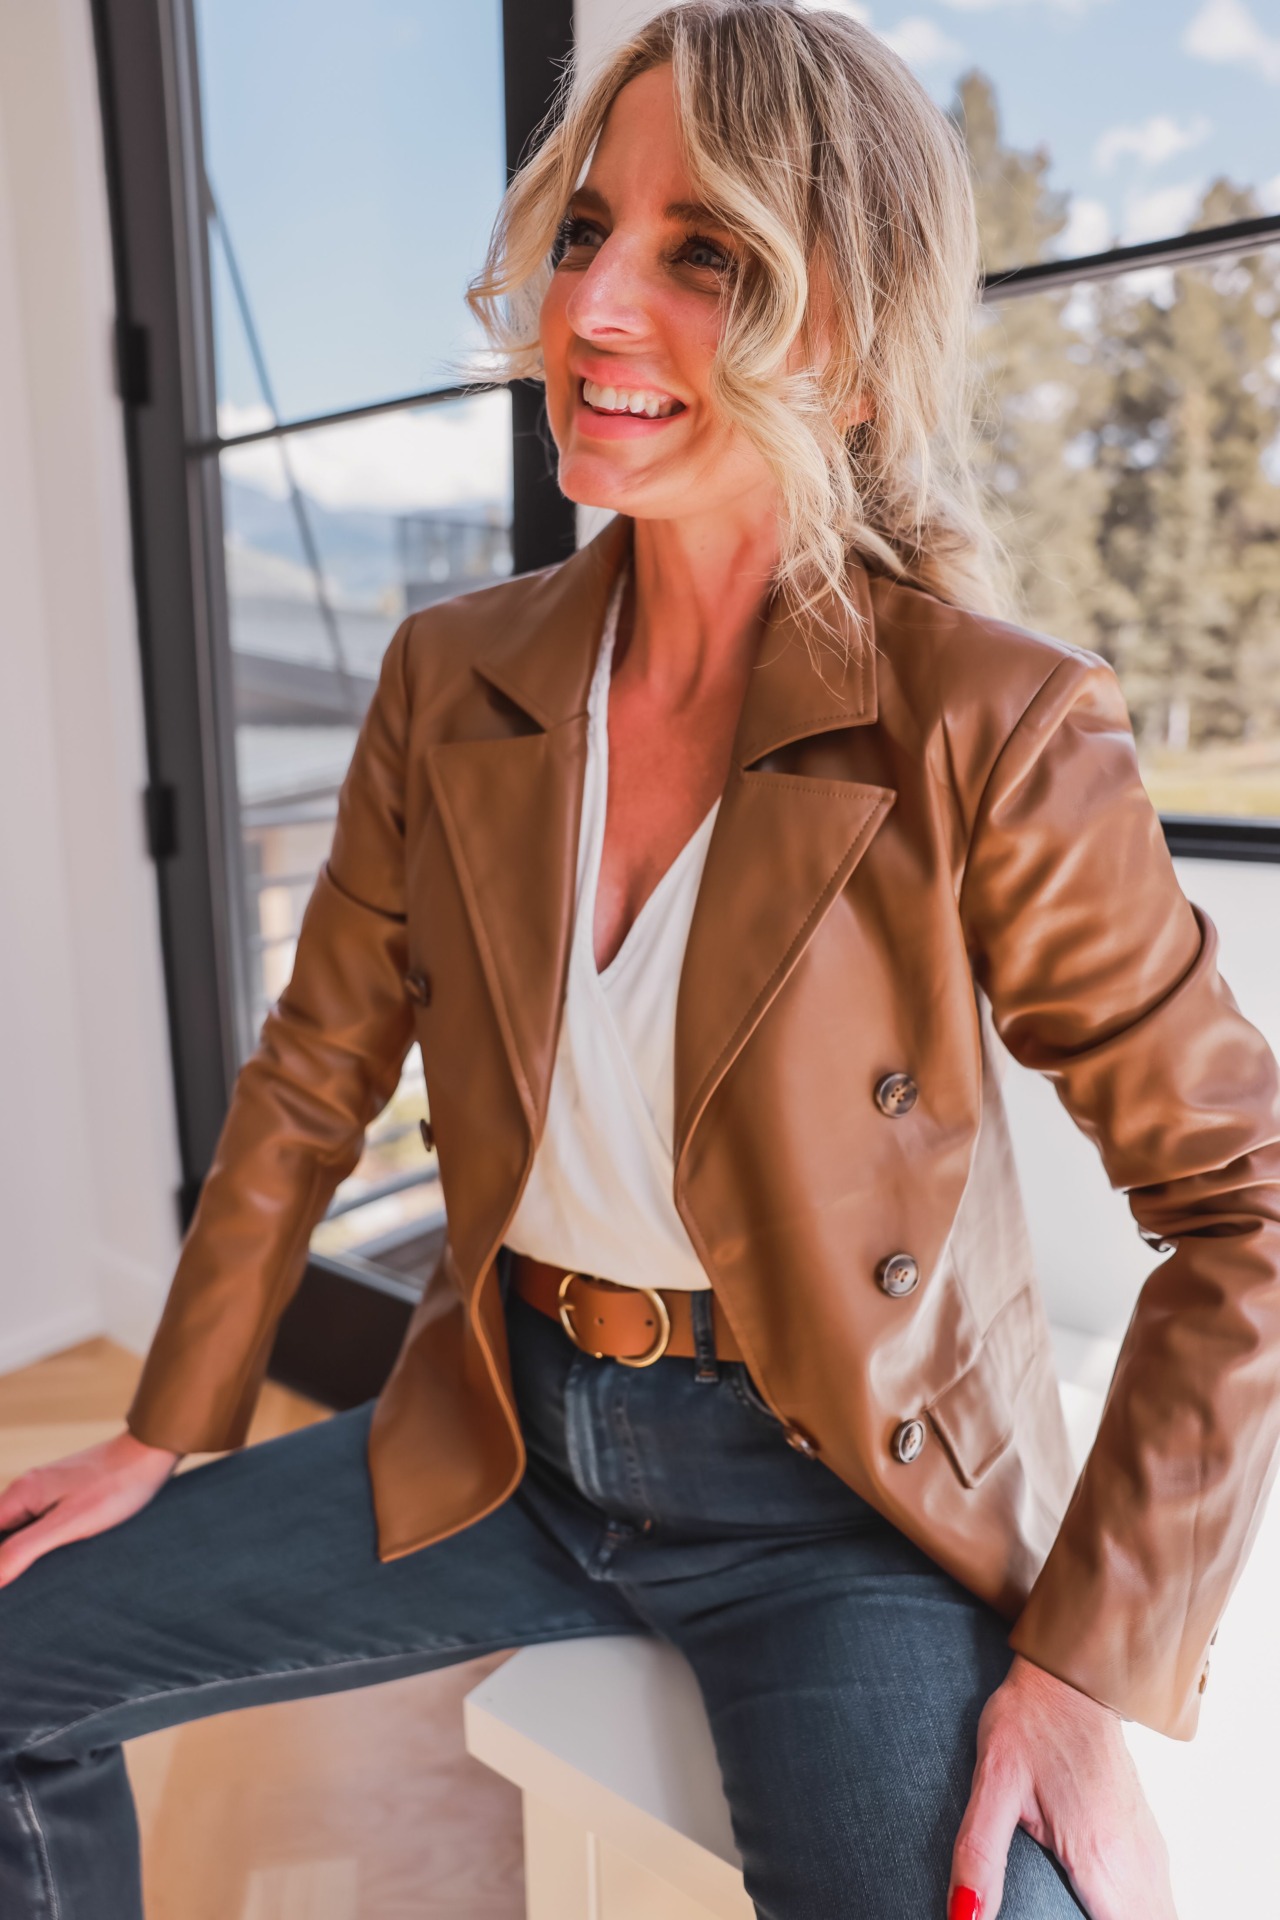 Fall jackets, fall outfits, best jackets for fall, don’t look frumpy in fall jackets, 3rd layer for fall, how to complete an outfit, leather blazers, black blazers, trench coat, puffer jacket, what to wear with jeans and a t-shirt, erin Busbee, fashion blogger over 40-telluride, CO, Evereve Elizabeth St Blazer